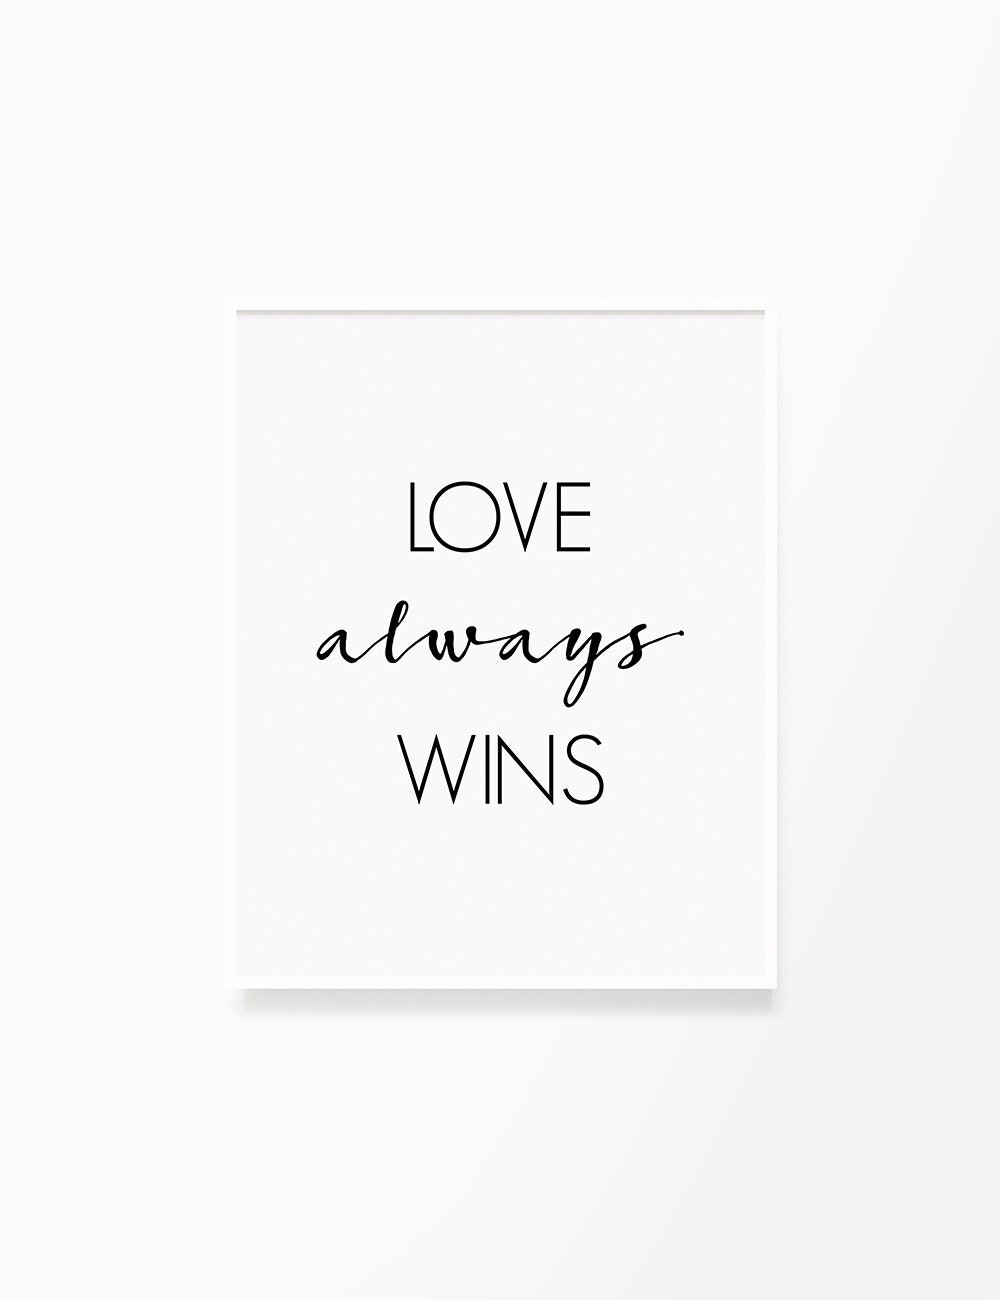 - Love Wins, Love Always Elegant Printable Love Clean, Poster, Etsy Wall Quote, Inspirational, Design Art, Minimalist, Typography Motivational,